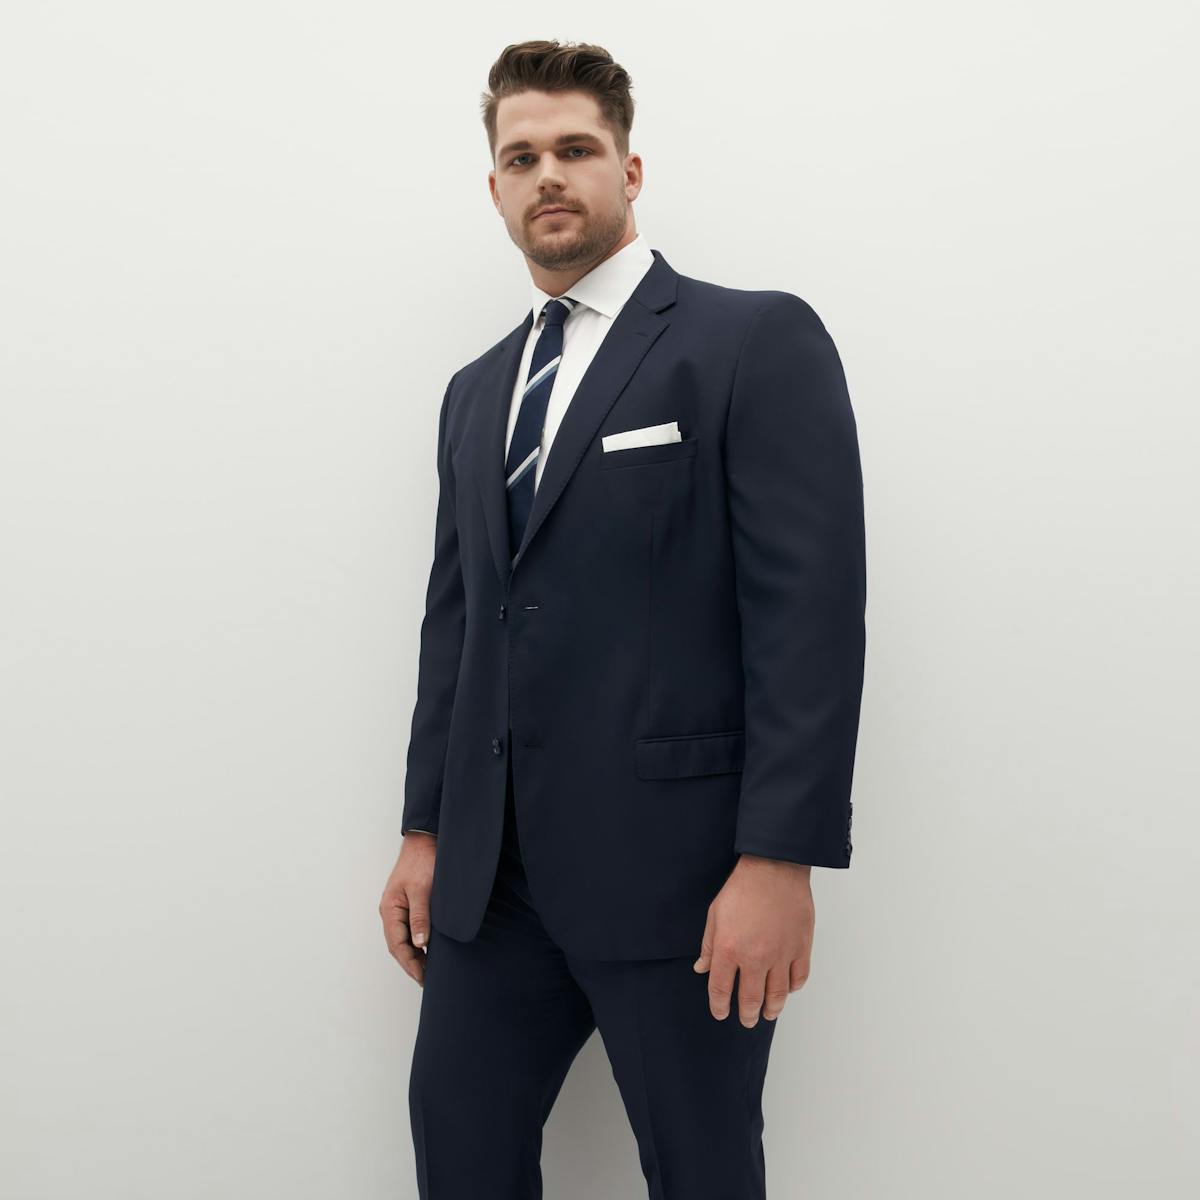 This navy blue suit on a big and tall man is perfect for a wintertime night out.